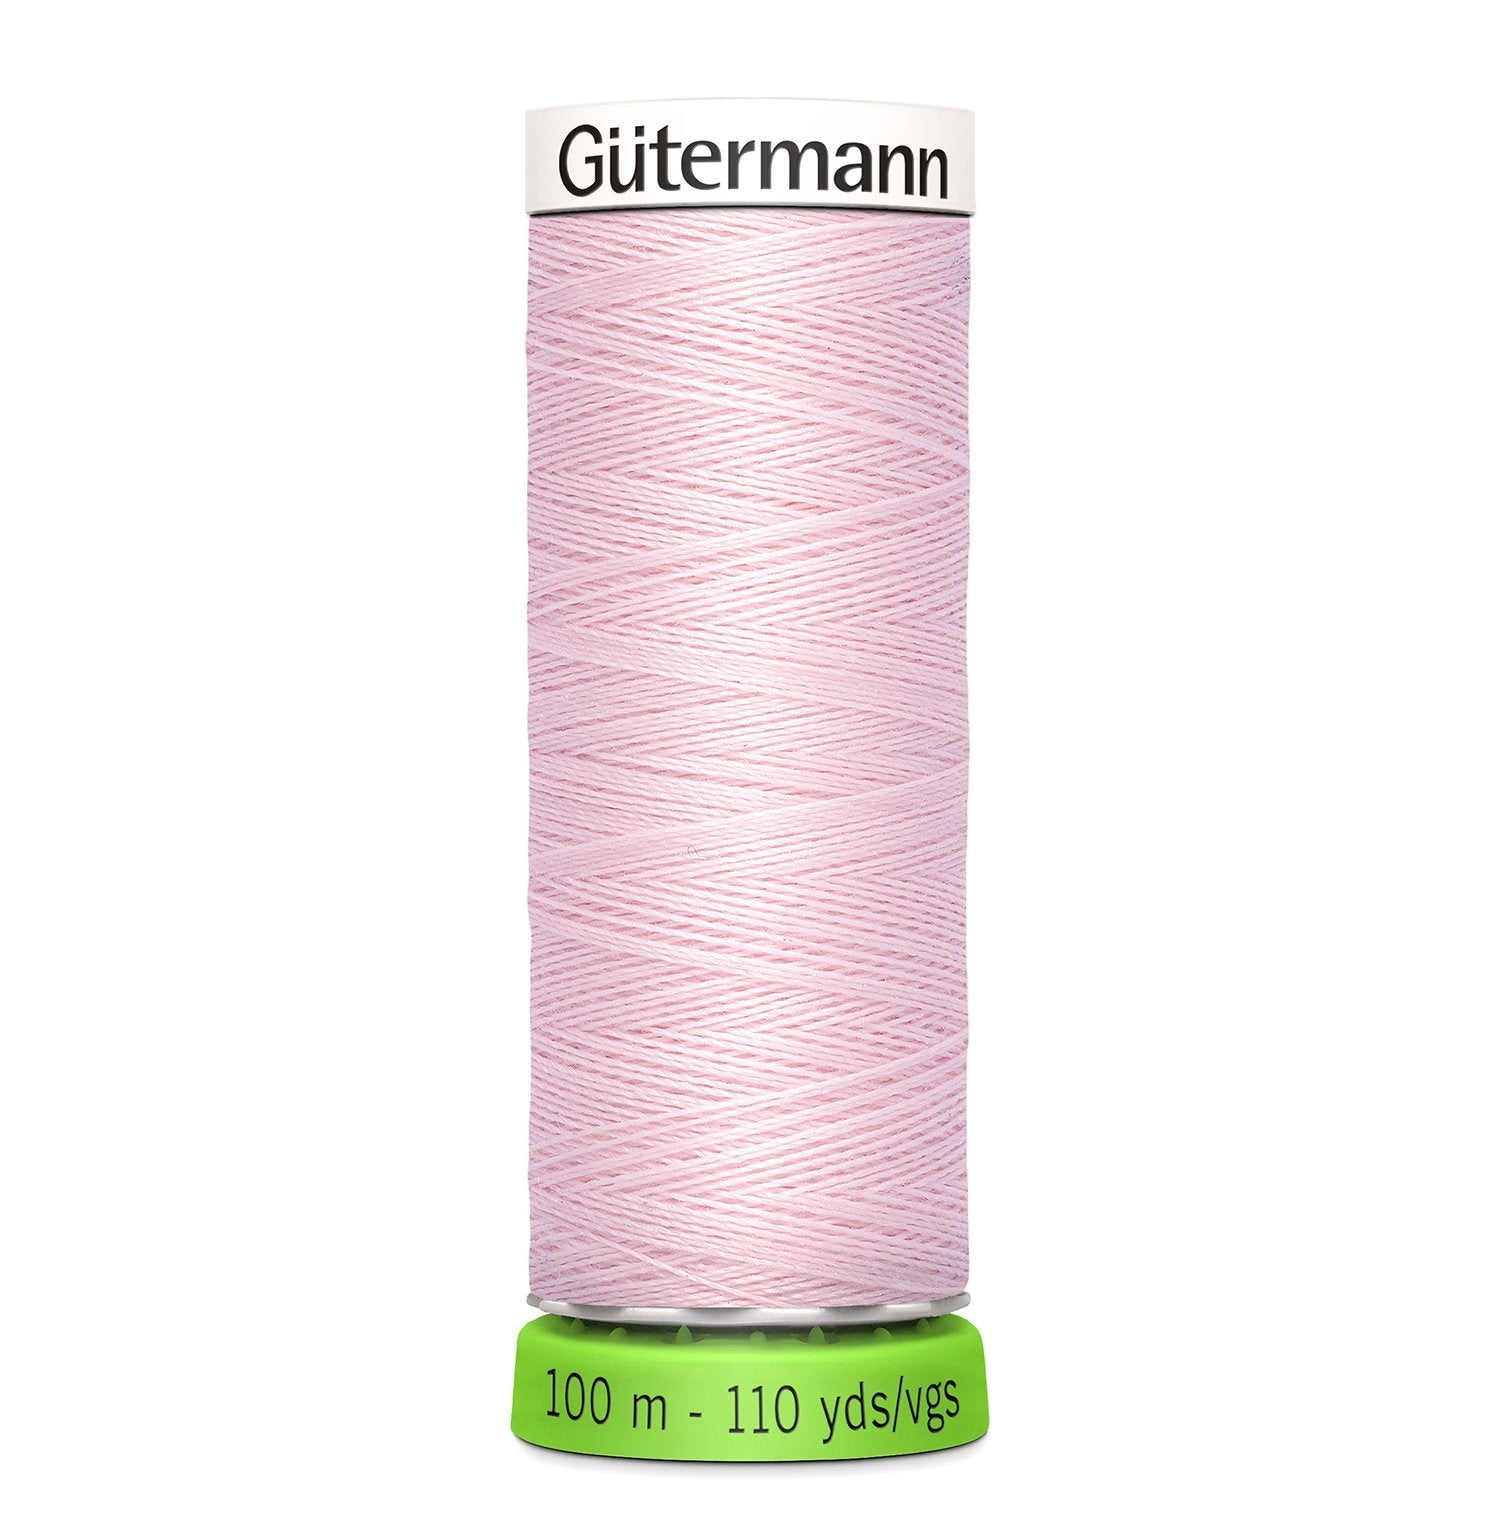 Gutermann Recycled Thread 100m, Colour 372 from Jaycotts Sewing Supplies